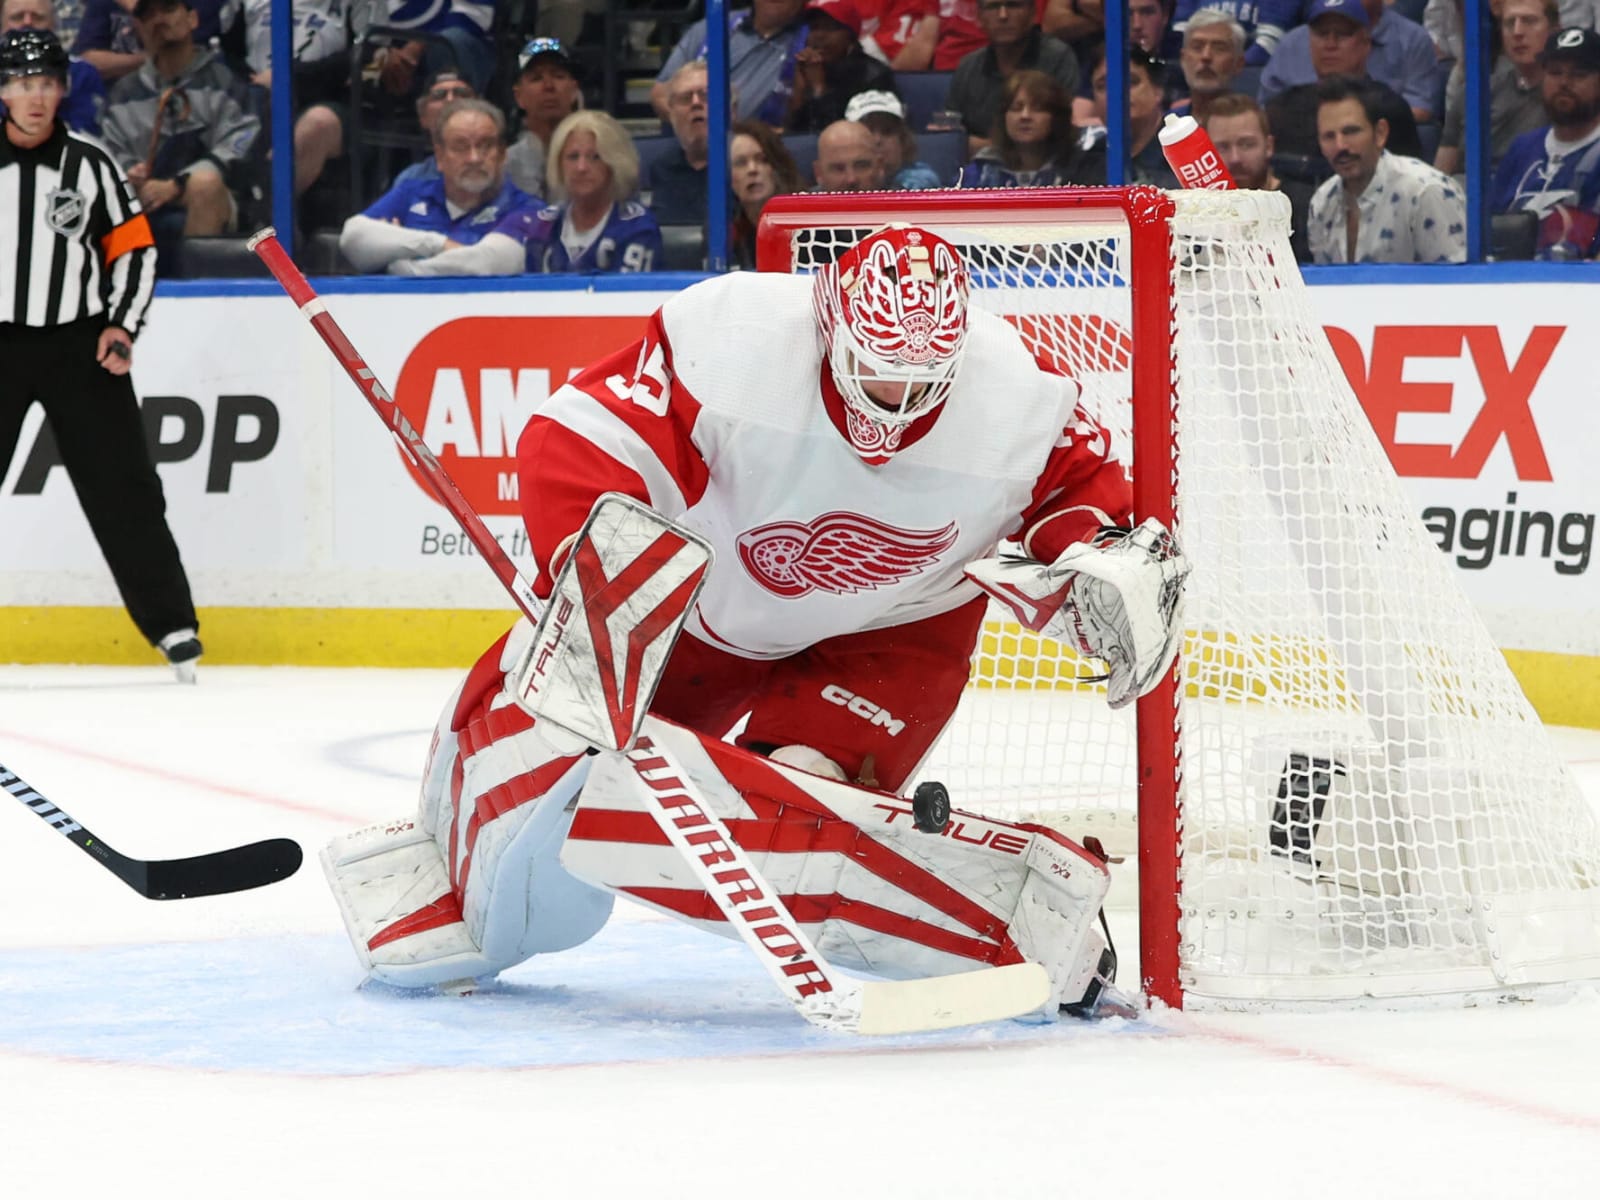 2020 Vision: What the Detroit Red Wings roster will look like in